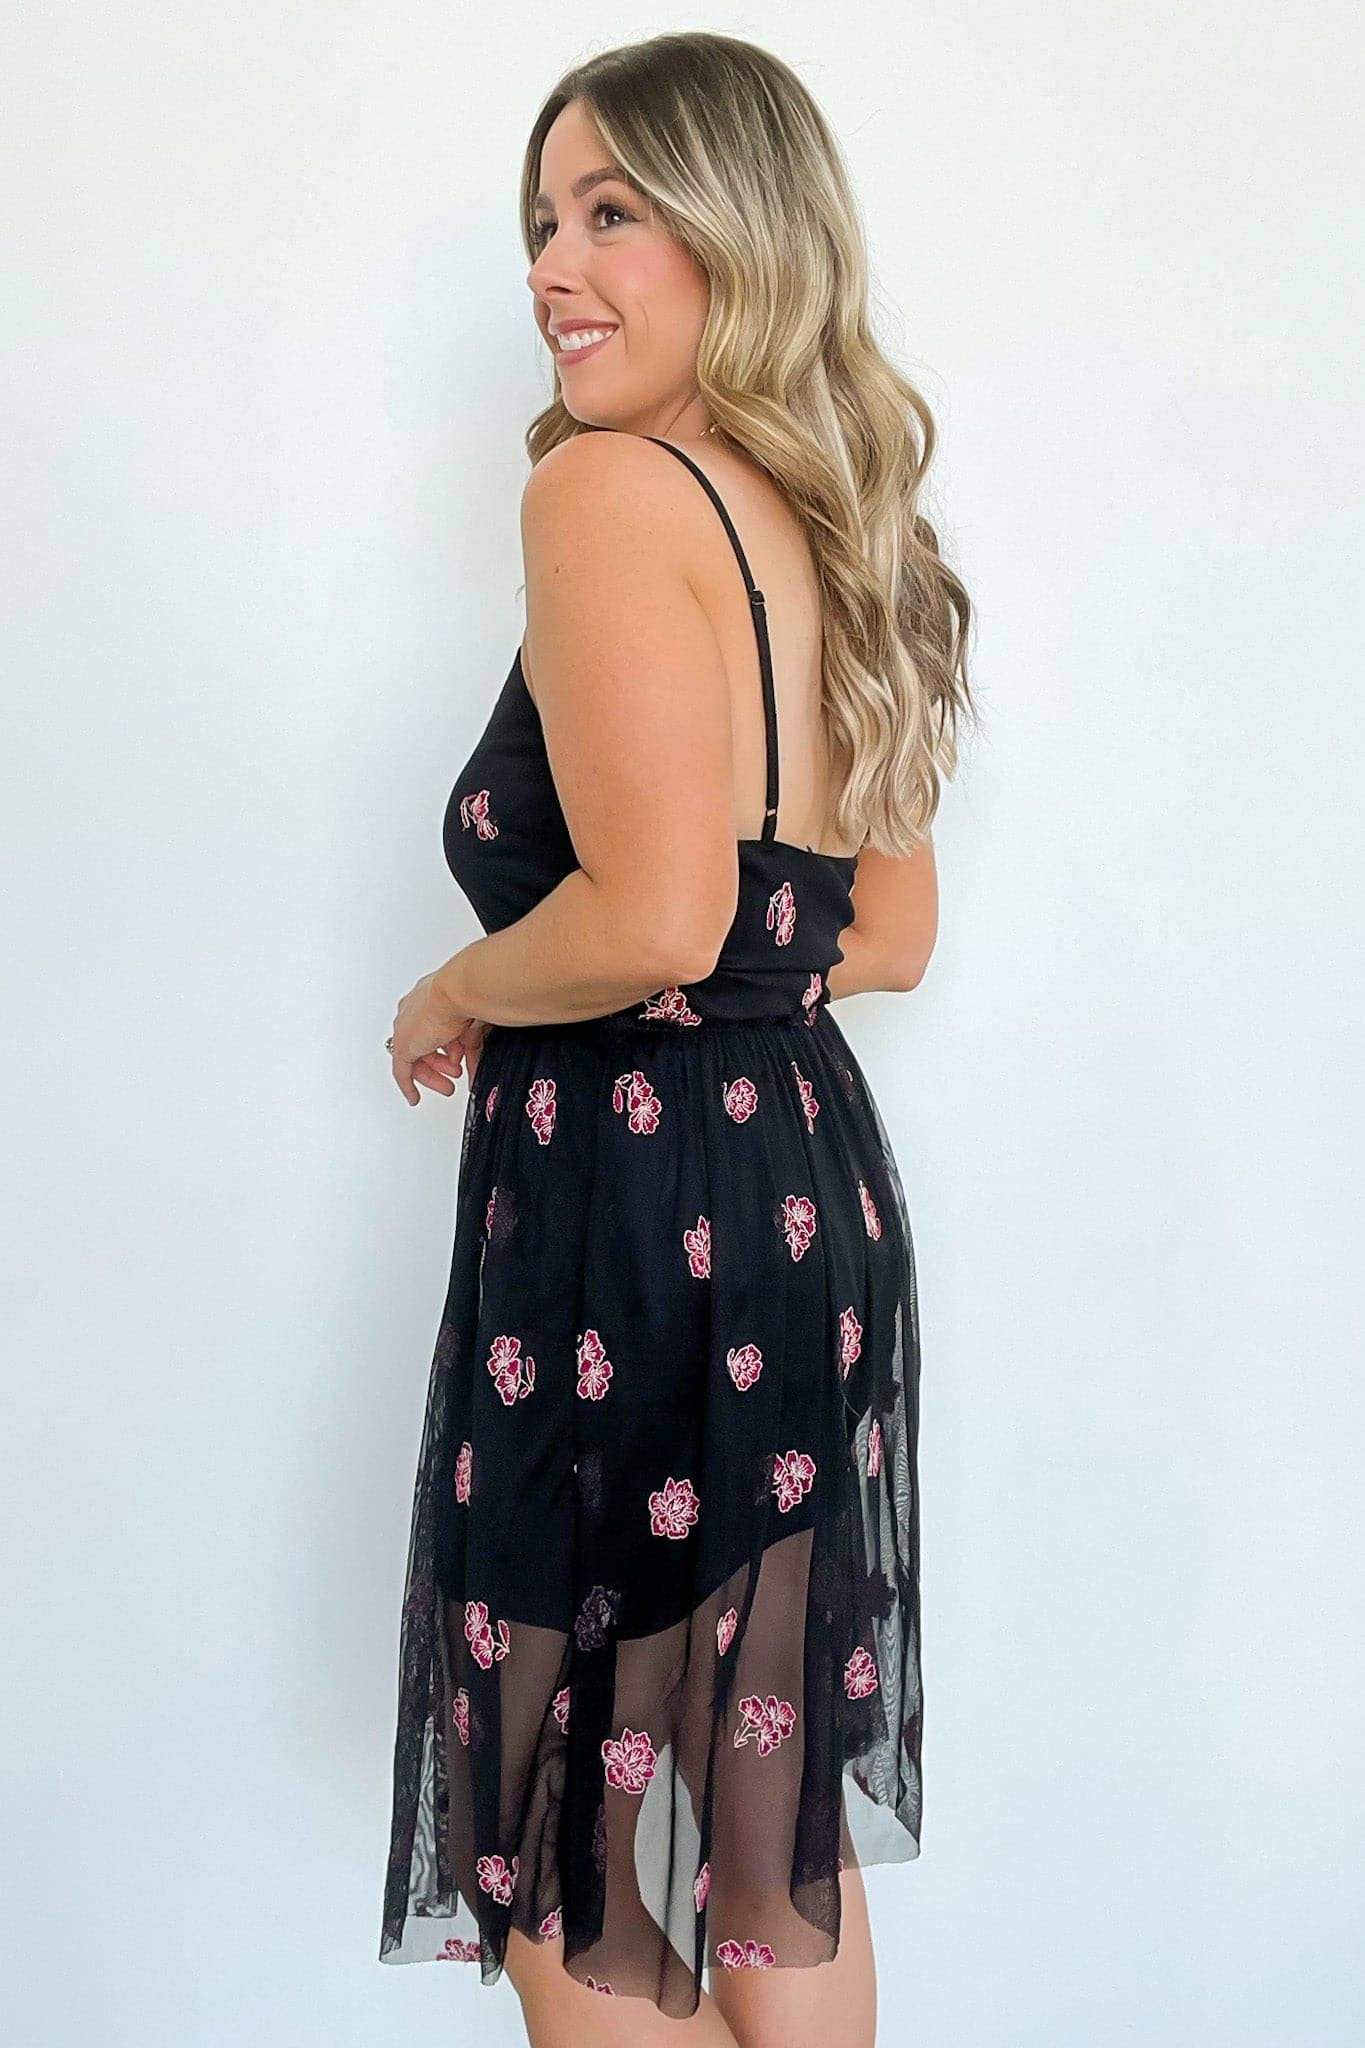  Flawless Stunner Sweetheart Floral Lace Dress - FINAL SALE - Madison and Mallory